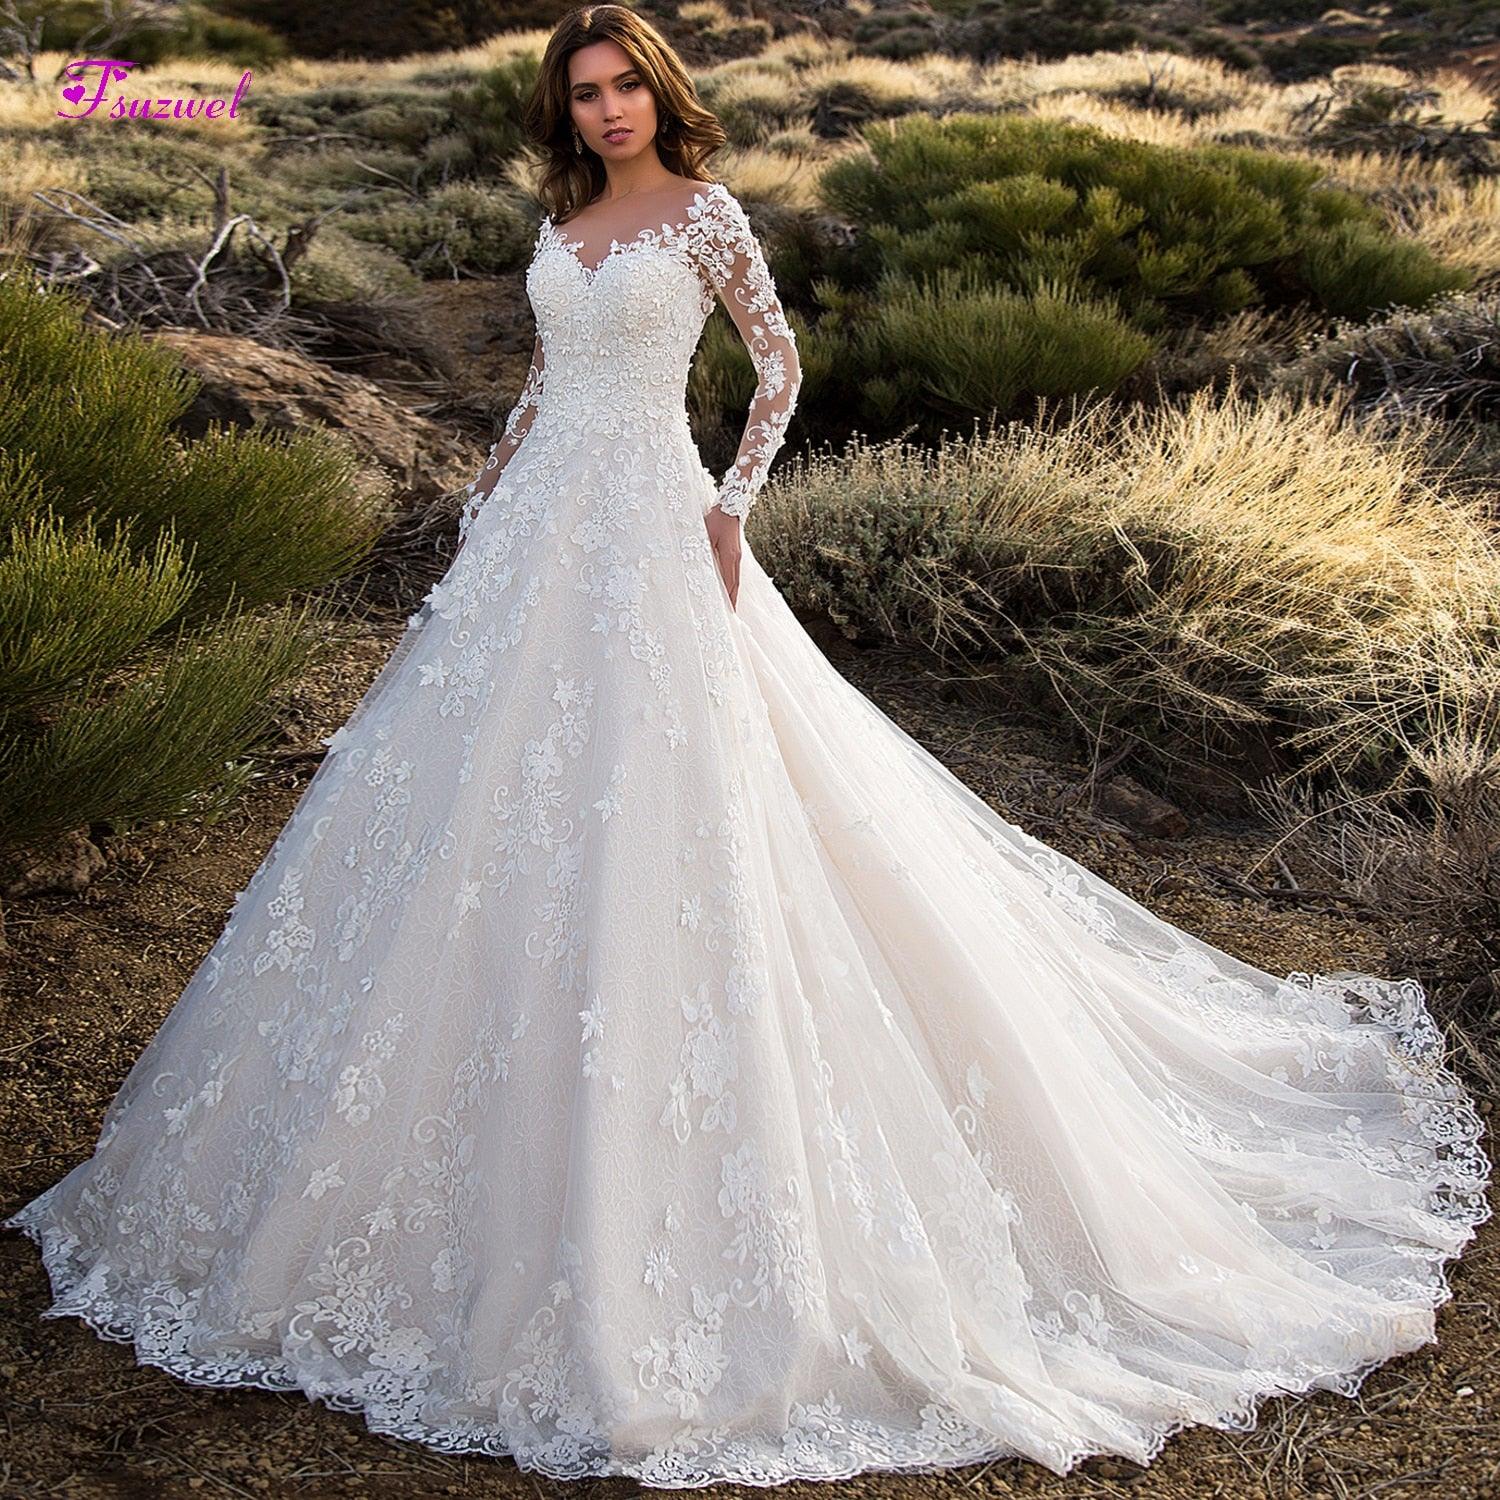 Great Lace A Line Wedding Dress - Sexy Scoop - Neck Flowers Long Sleeve Princess Bride Gown - Plus Size (WSO1)